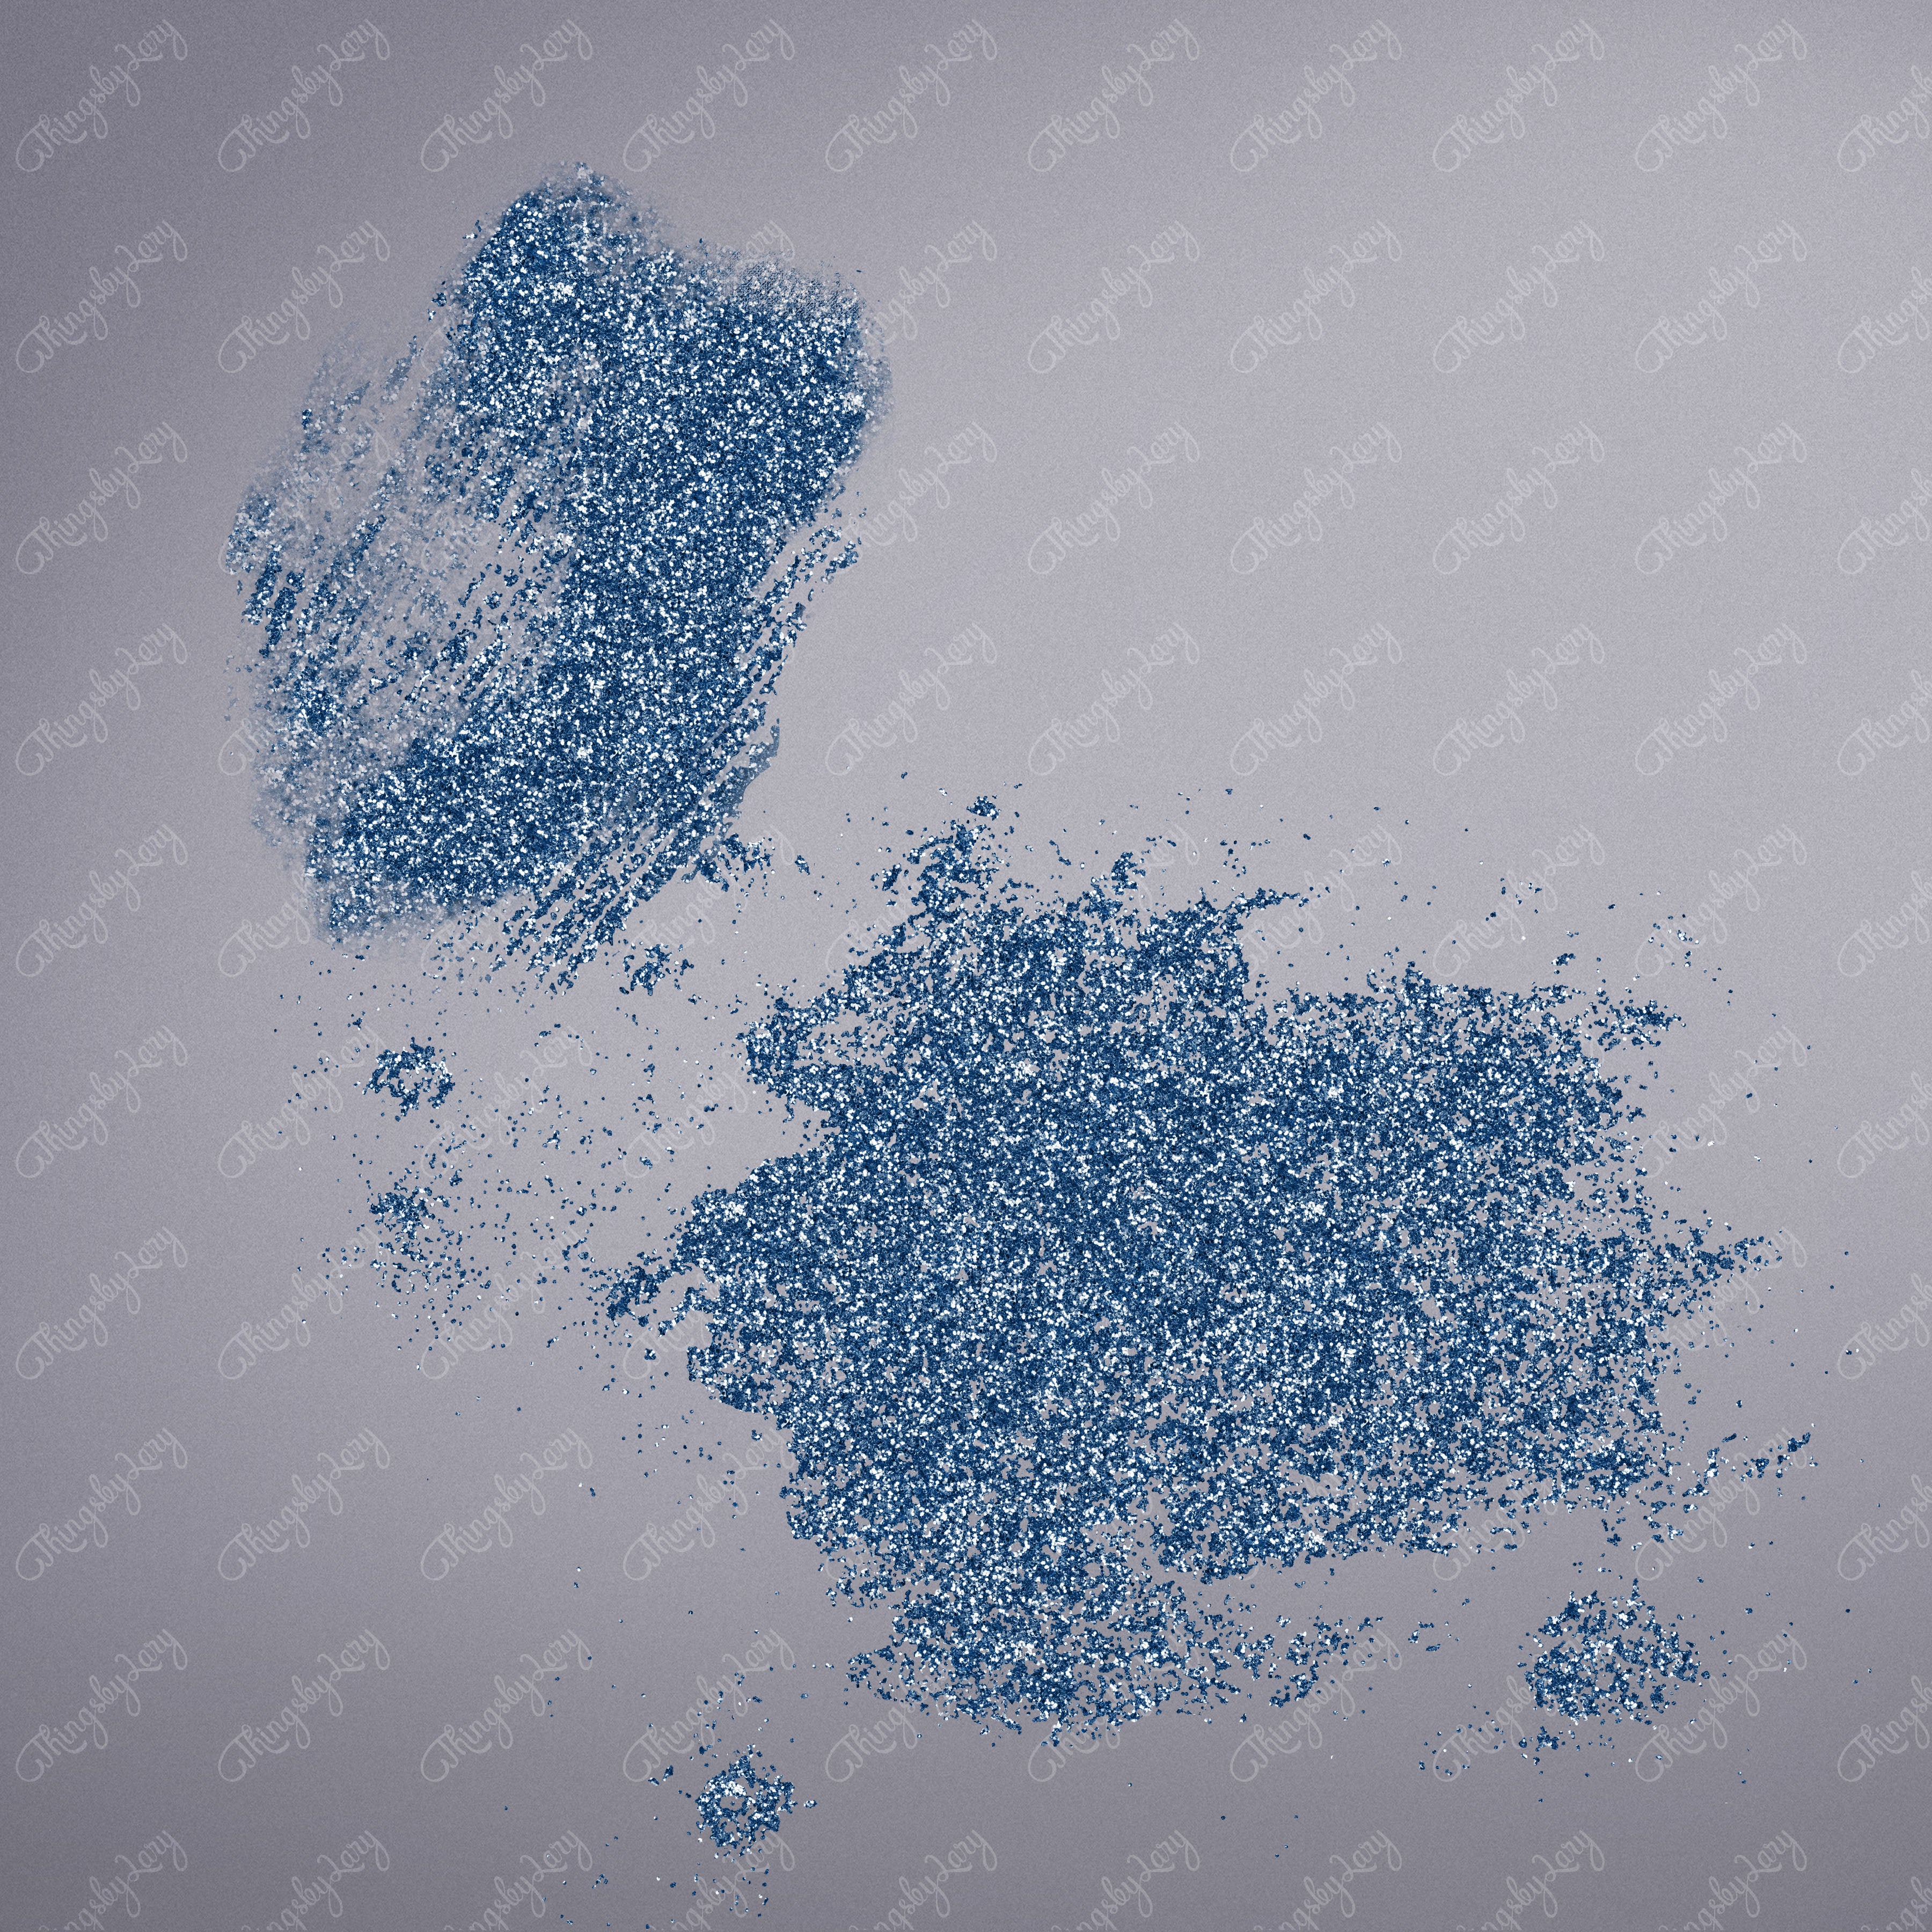 70 Midnight Blue Glitter Particles Set PNG Overlay Images